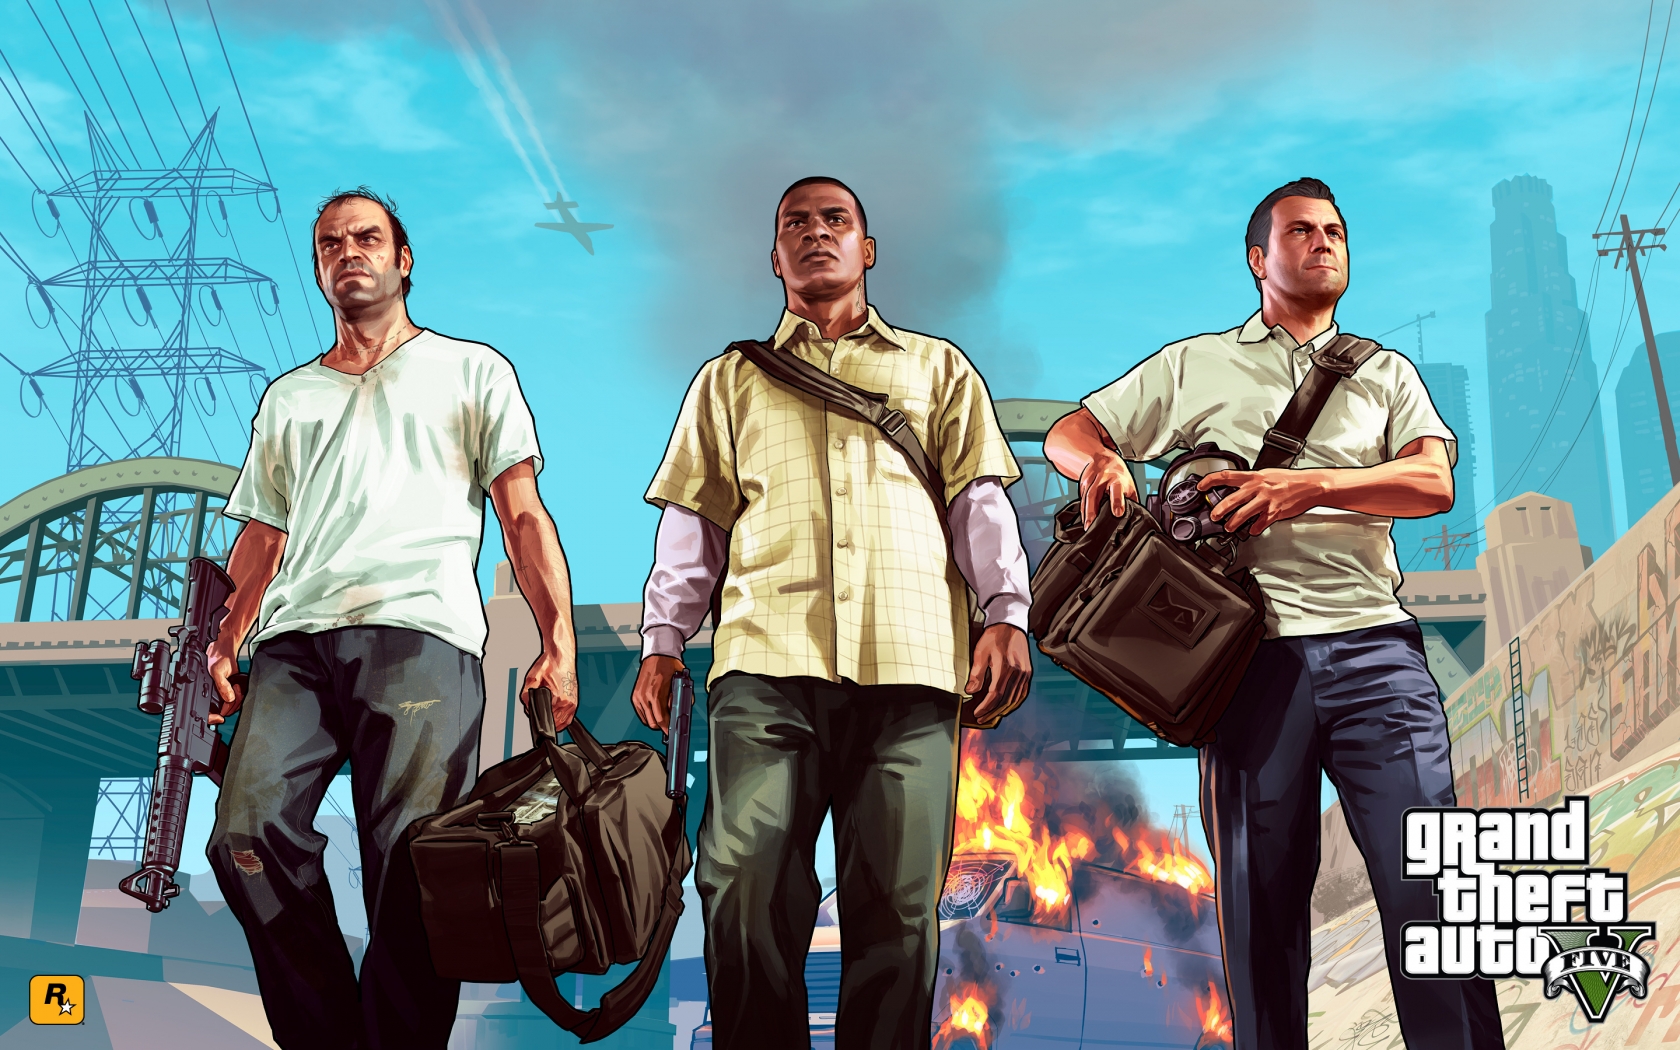 Grand Theft Auto Vice City for 1680 x 1050 widescreen resolution